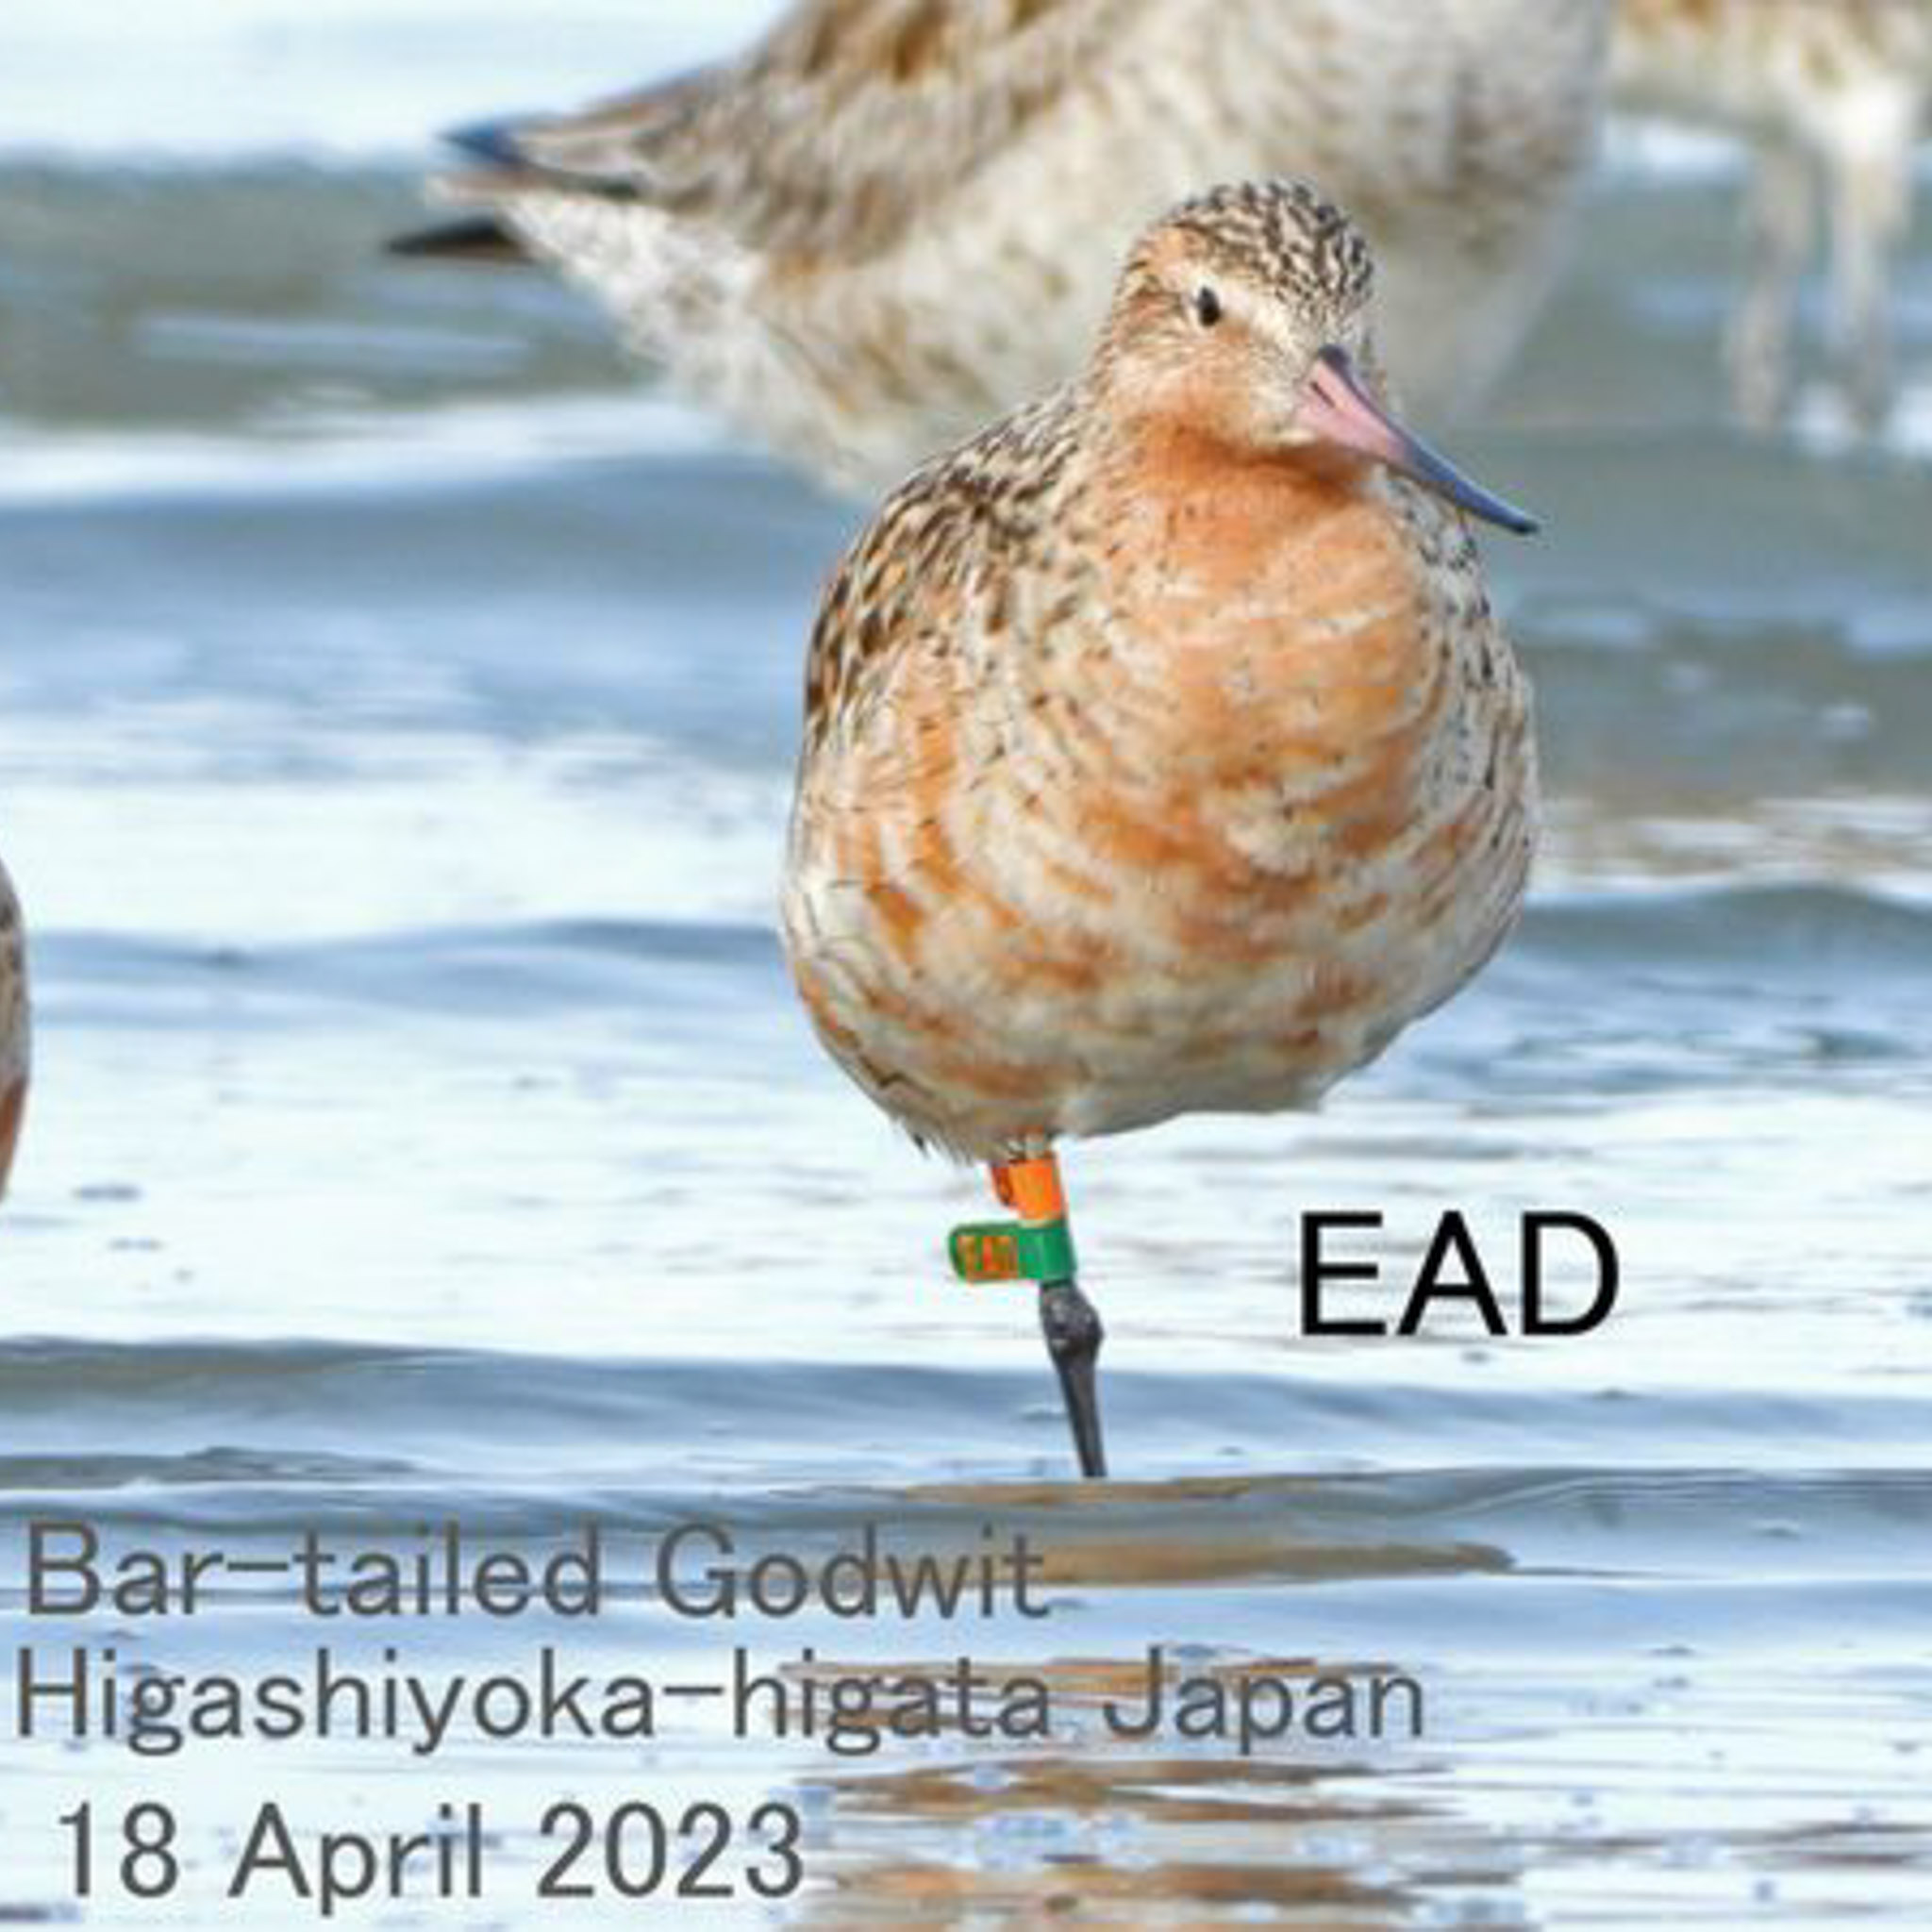 Bar-tailed Godwit bird in Japan with band on its leg^empty:{ds__assetid^as_asset:asset_name}